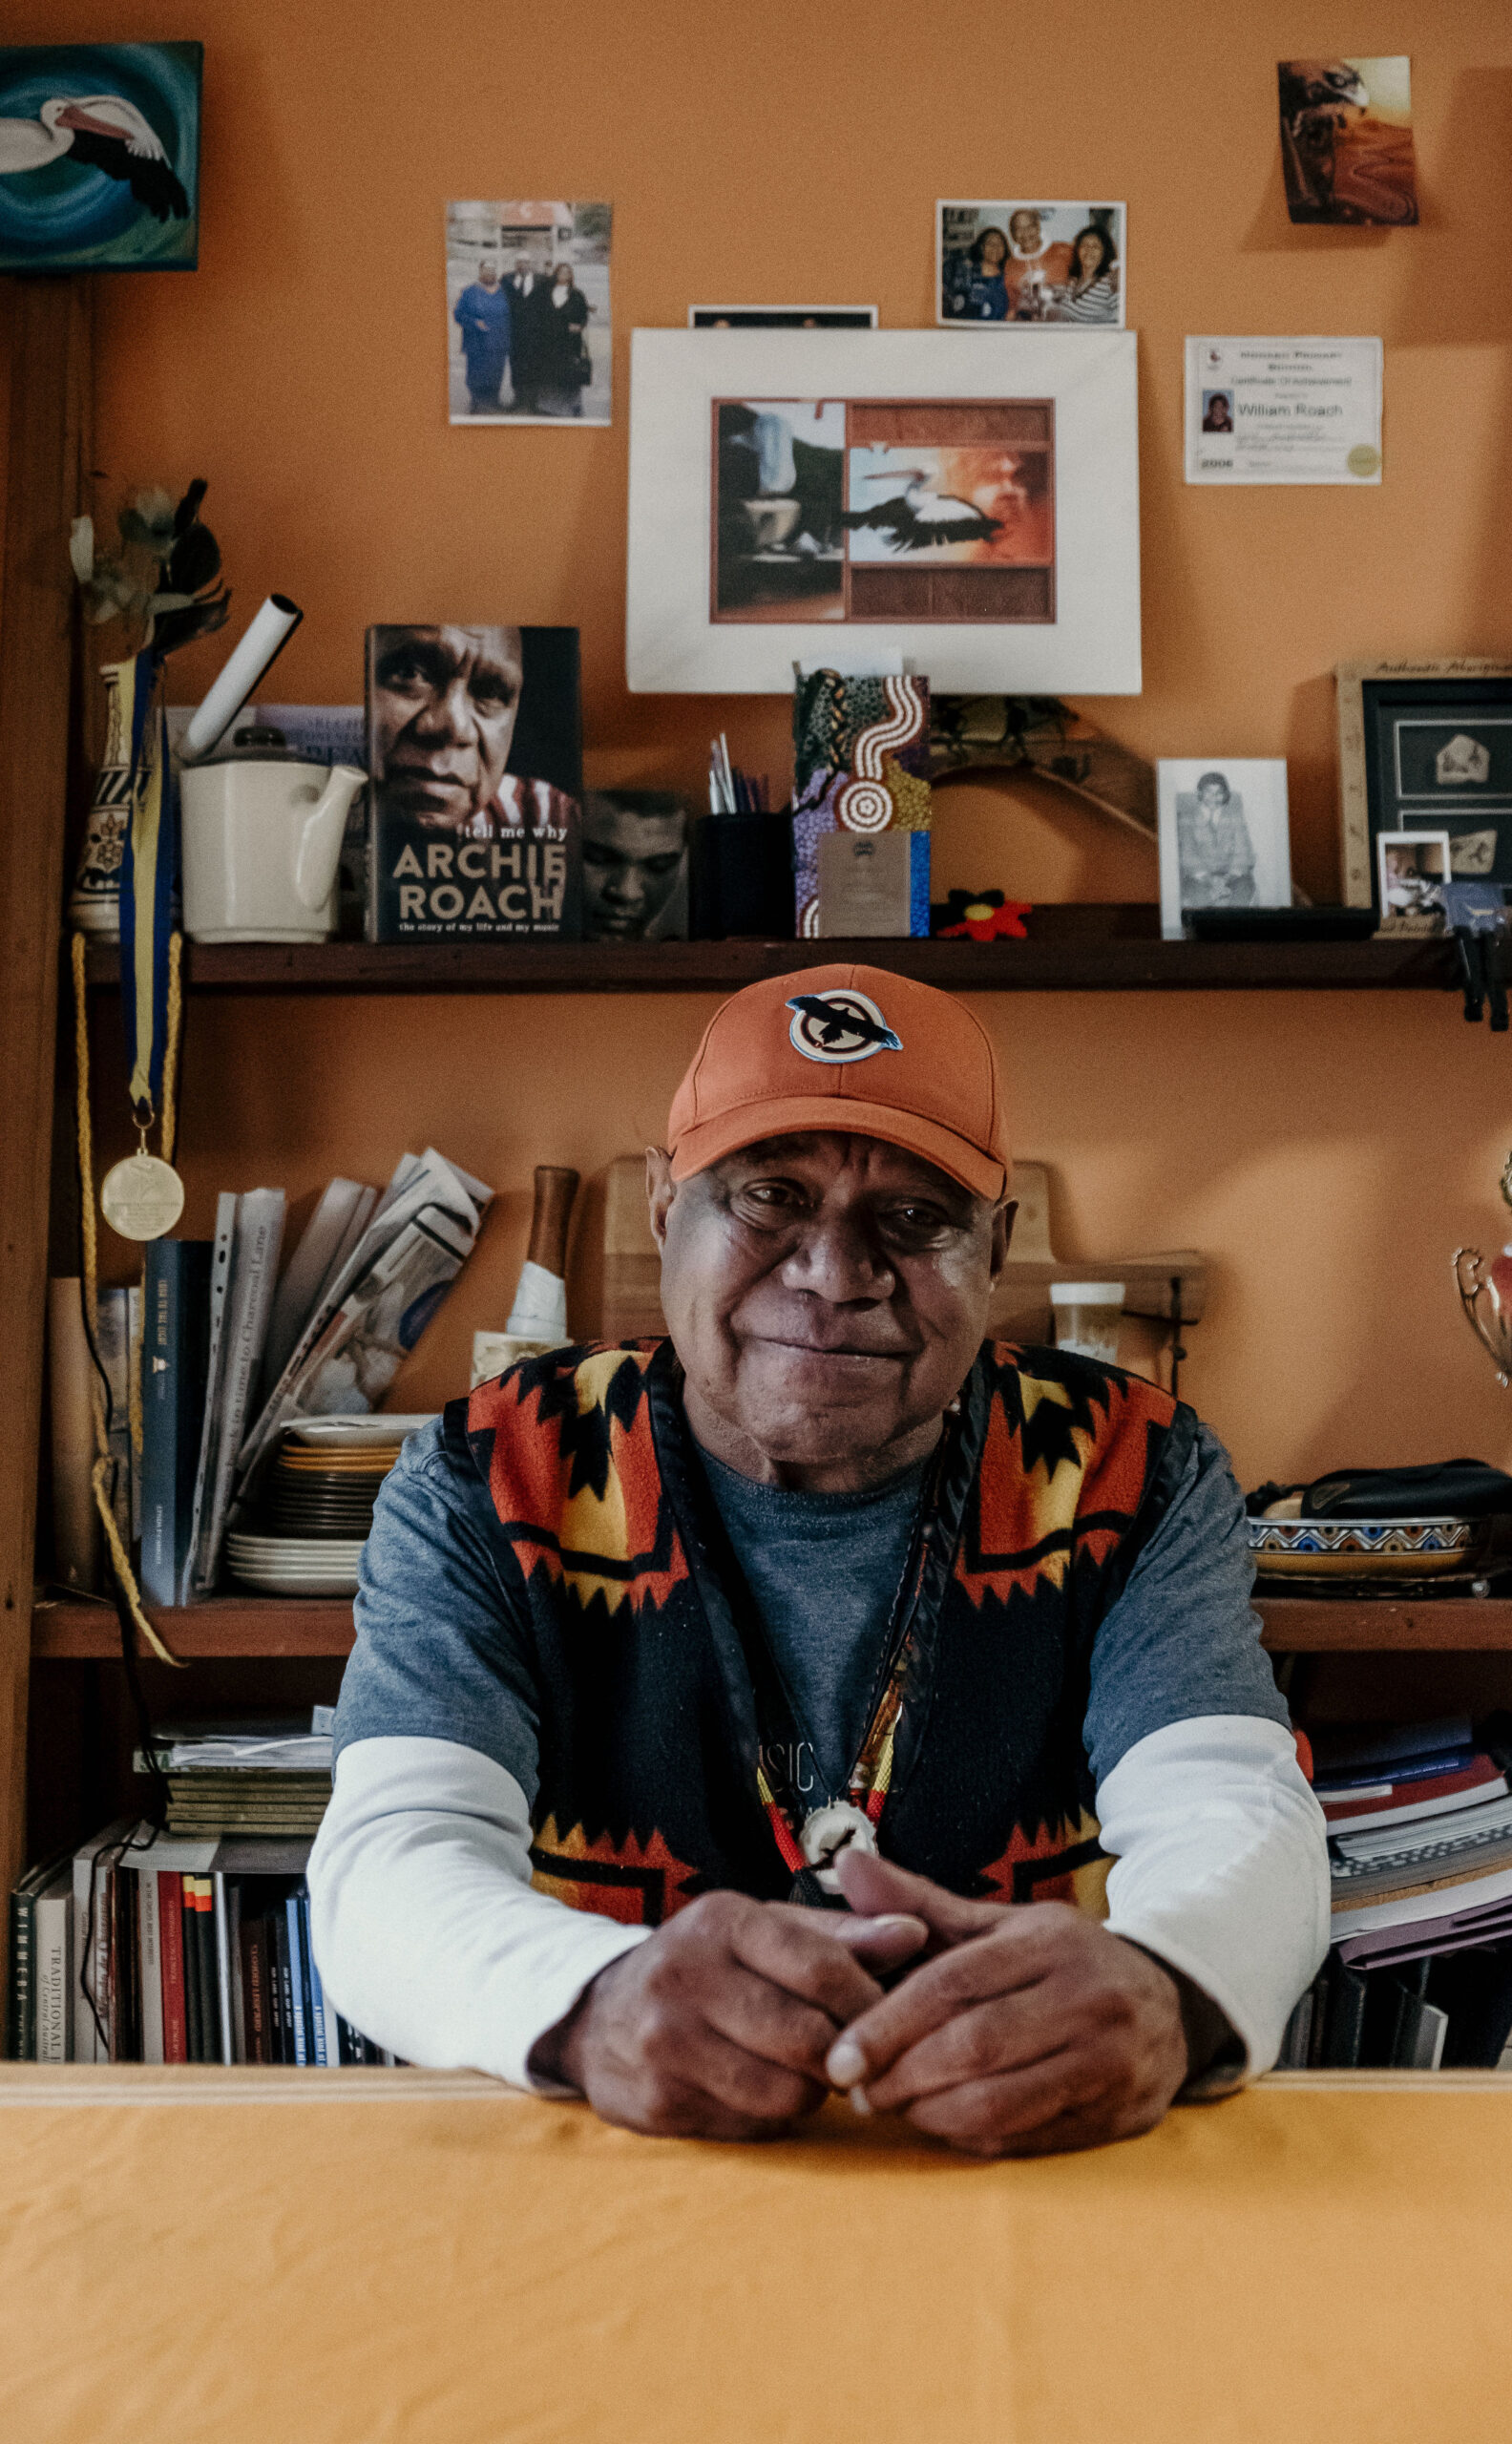 ARCHIE ROACH ANNOUNCES INAUGURAL ‘ARCHIE ROACH FOUNDATION STAGE’ FOR PORT FAIRY FOLK FEST + EPISODE ONE OF ‘KITCHEN TABLE YARNS’ SET TO DROP 5PM AEST WEDNESDAY AUGUST 4  POSTPONES AUGUST NSW REGIONAL TOUR